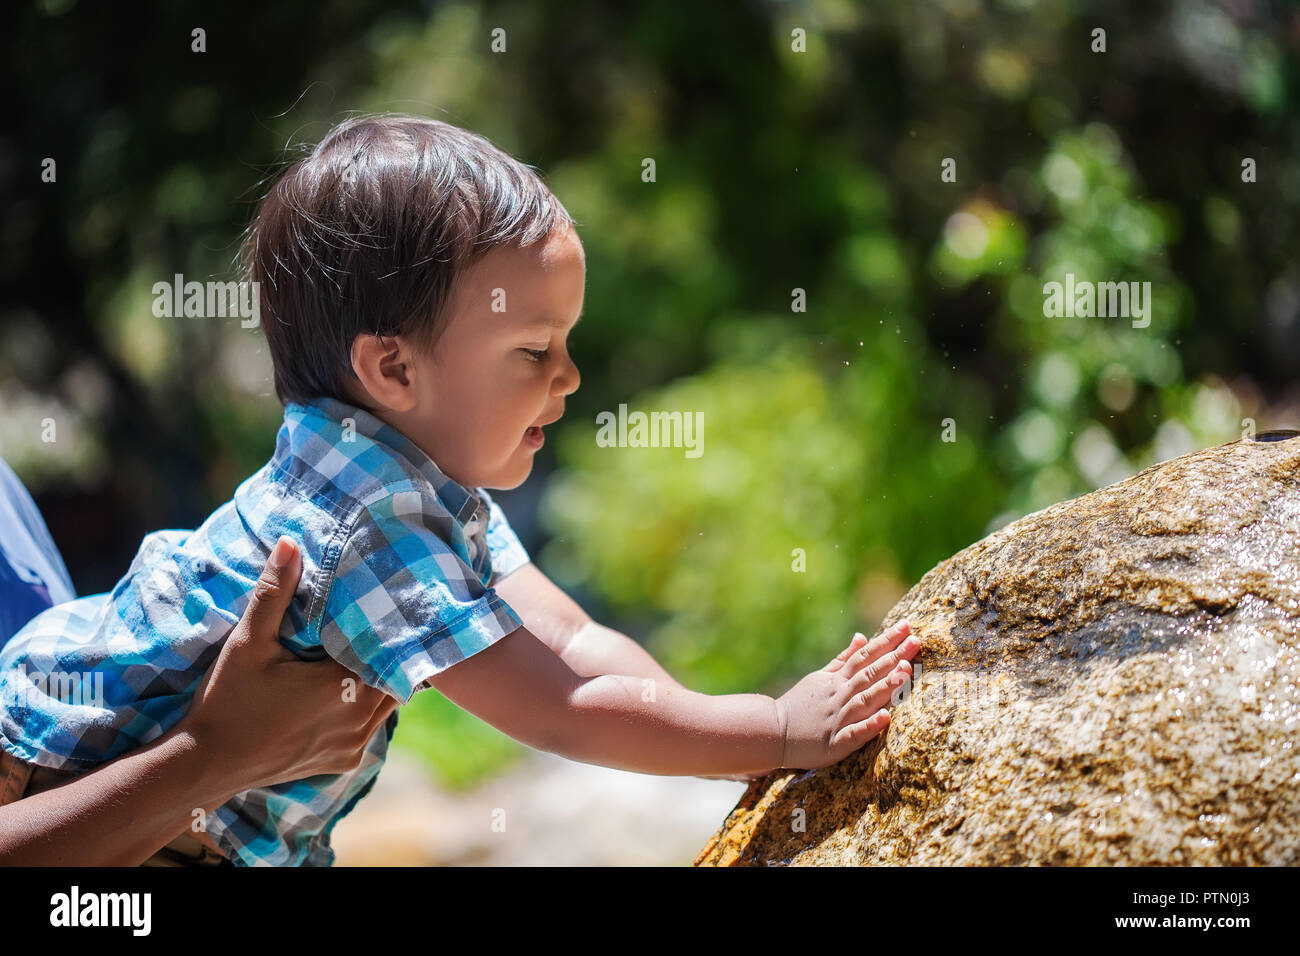 Mother supporting her toddler boy as he explores touching a natural water fountain outdoors and splashing Stock Photo